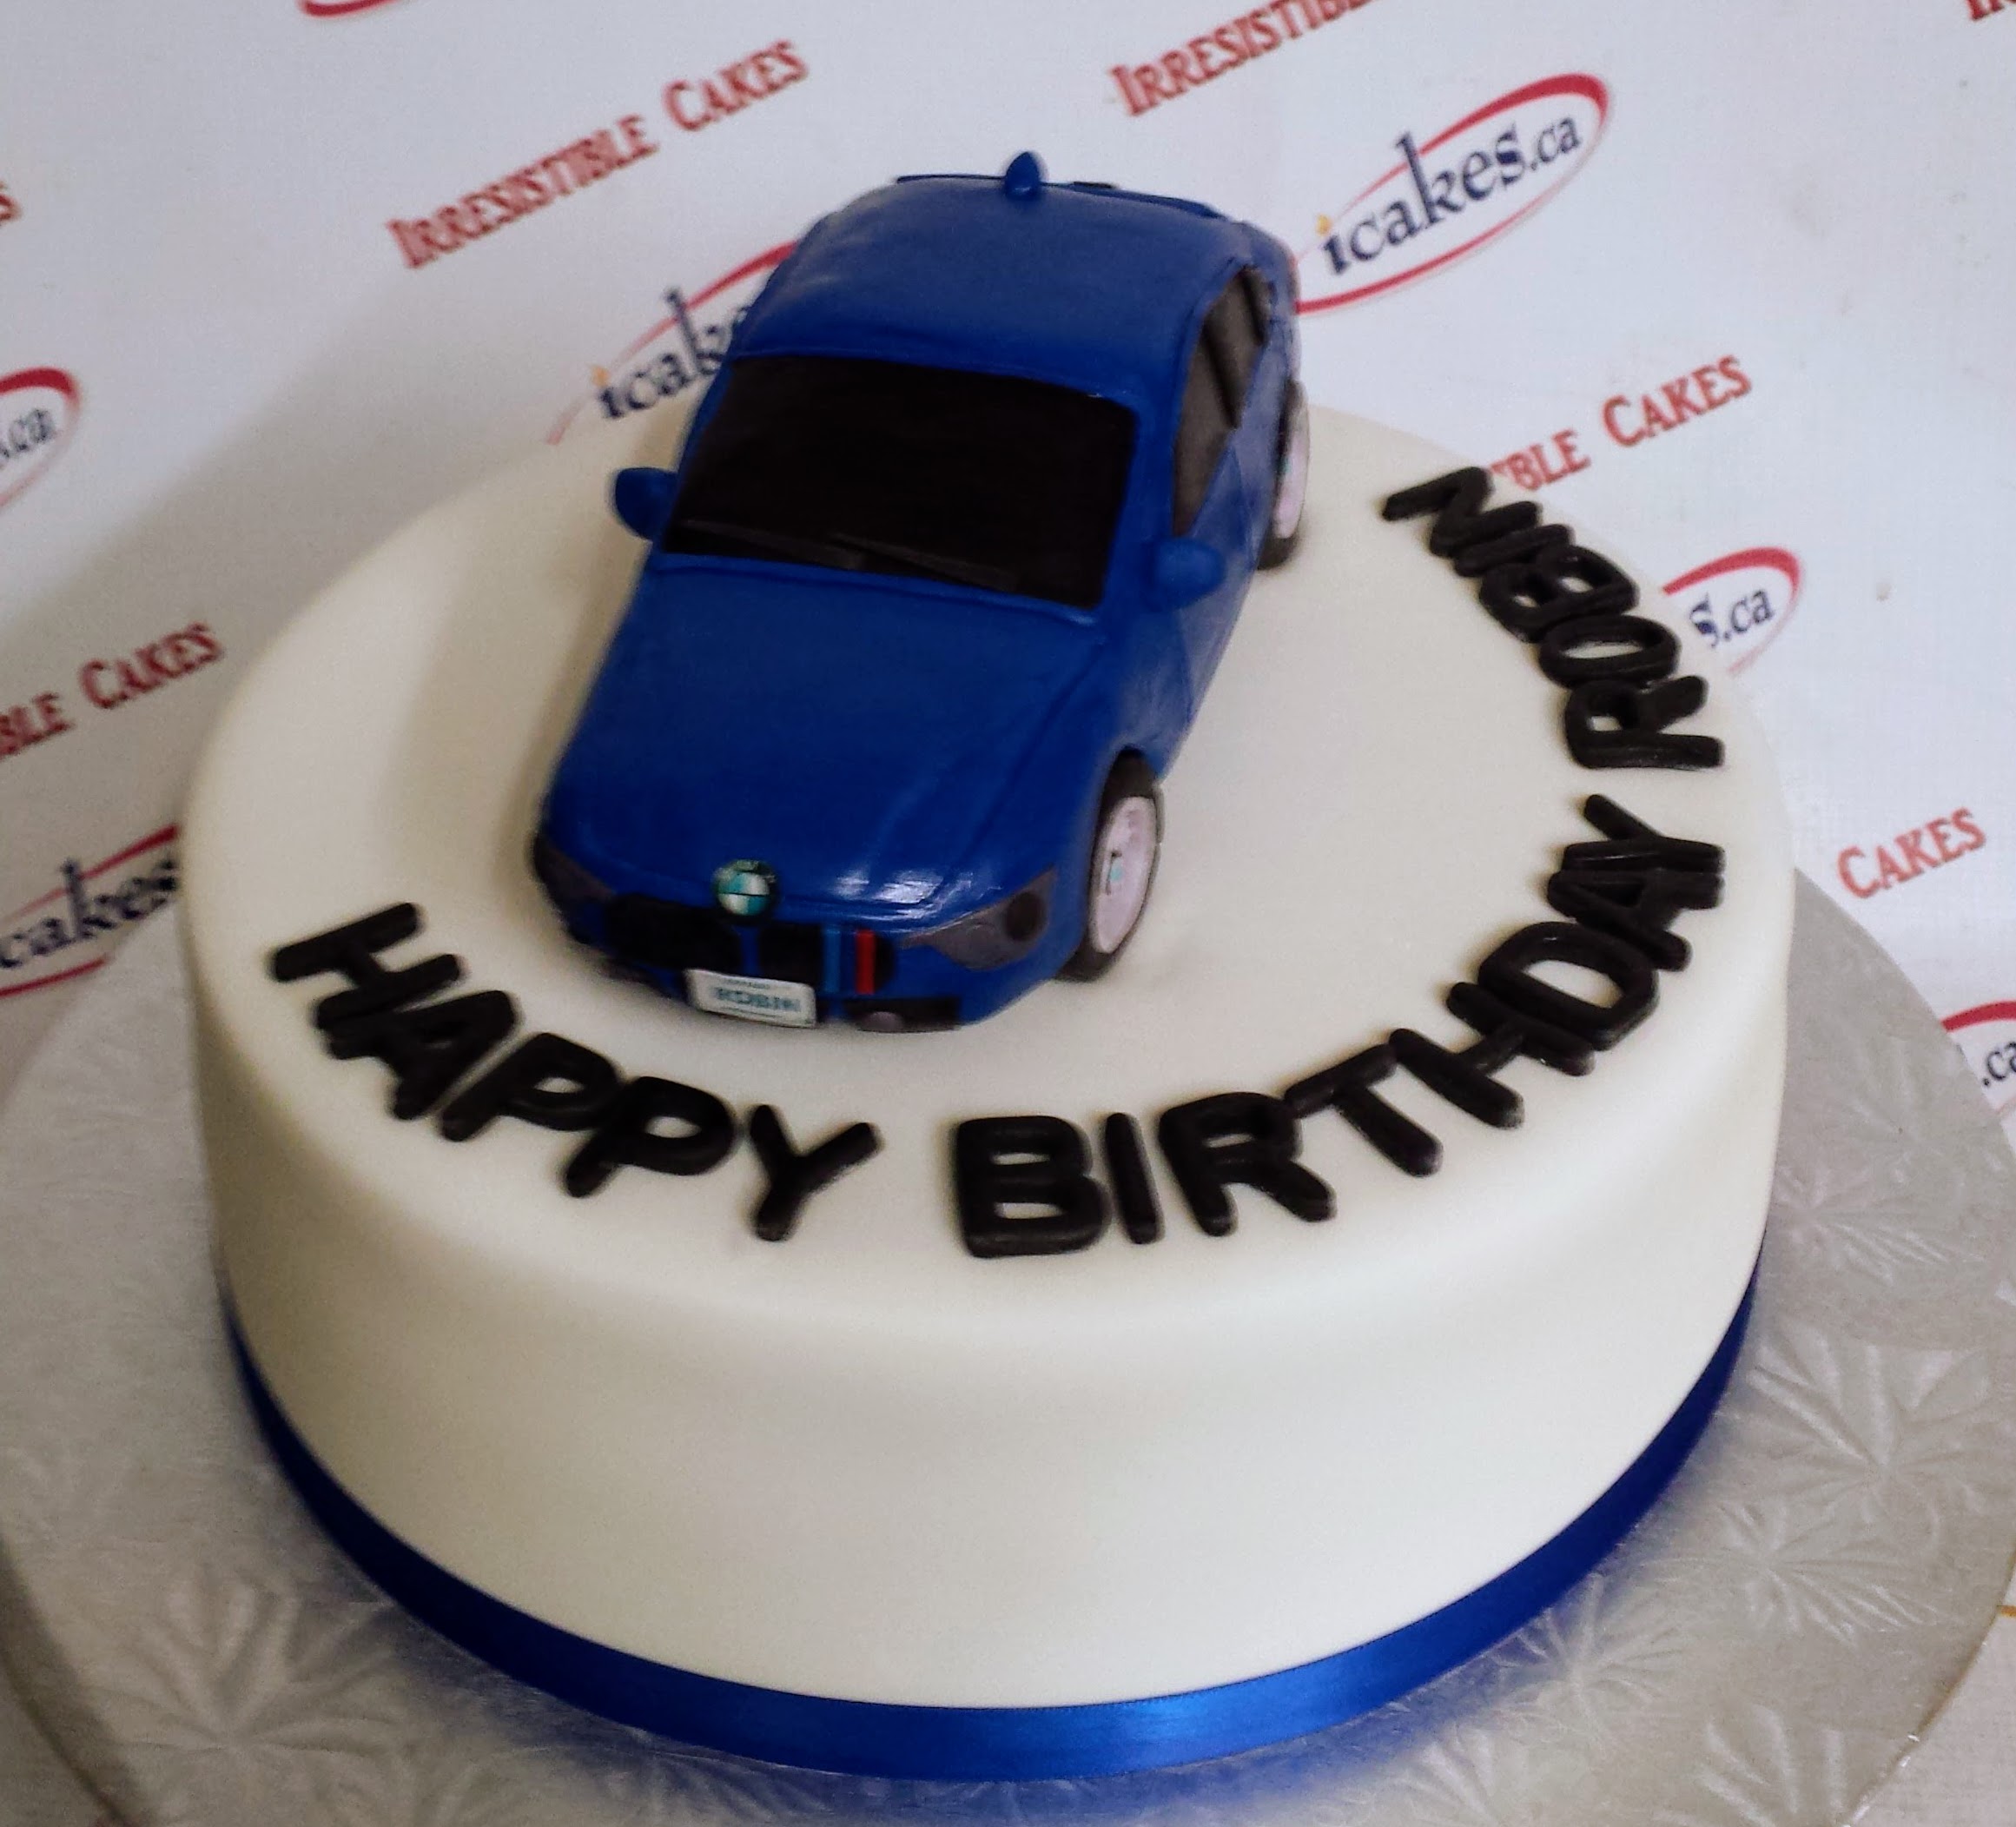 1,000 Car Shaped Cake Royalty-Free Photos and Stock Images | Shutterstock